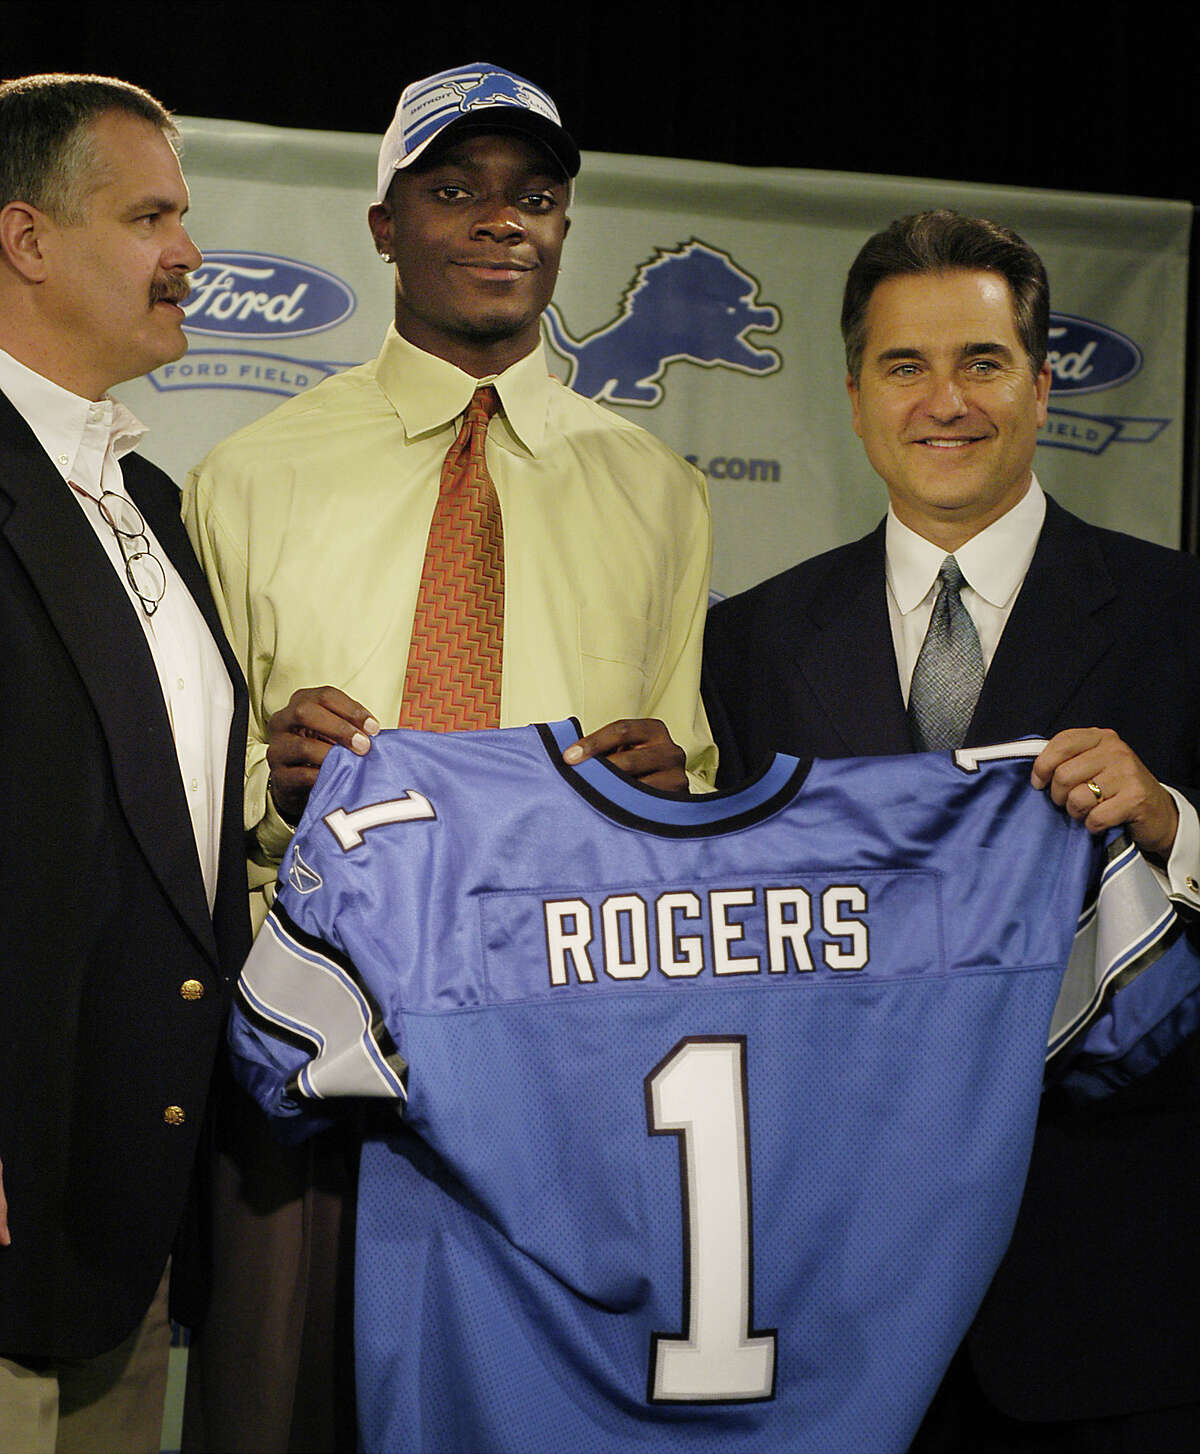 Detroit Lions president and chief executive officer Matt Millen, left, and Lions head coach Steve Mariucci, right, pose with Charles Rogers, the team's first round draft choice, during a press conference on Sunday, April 27, 2003 at the Lion's practice facility in Allen Park, Mich. The wide receiver out of Michigan State was the second overall pick in the 2003 NFL draft on Saturday.